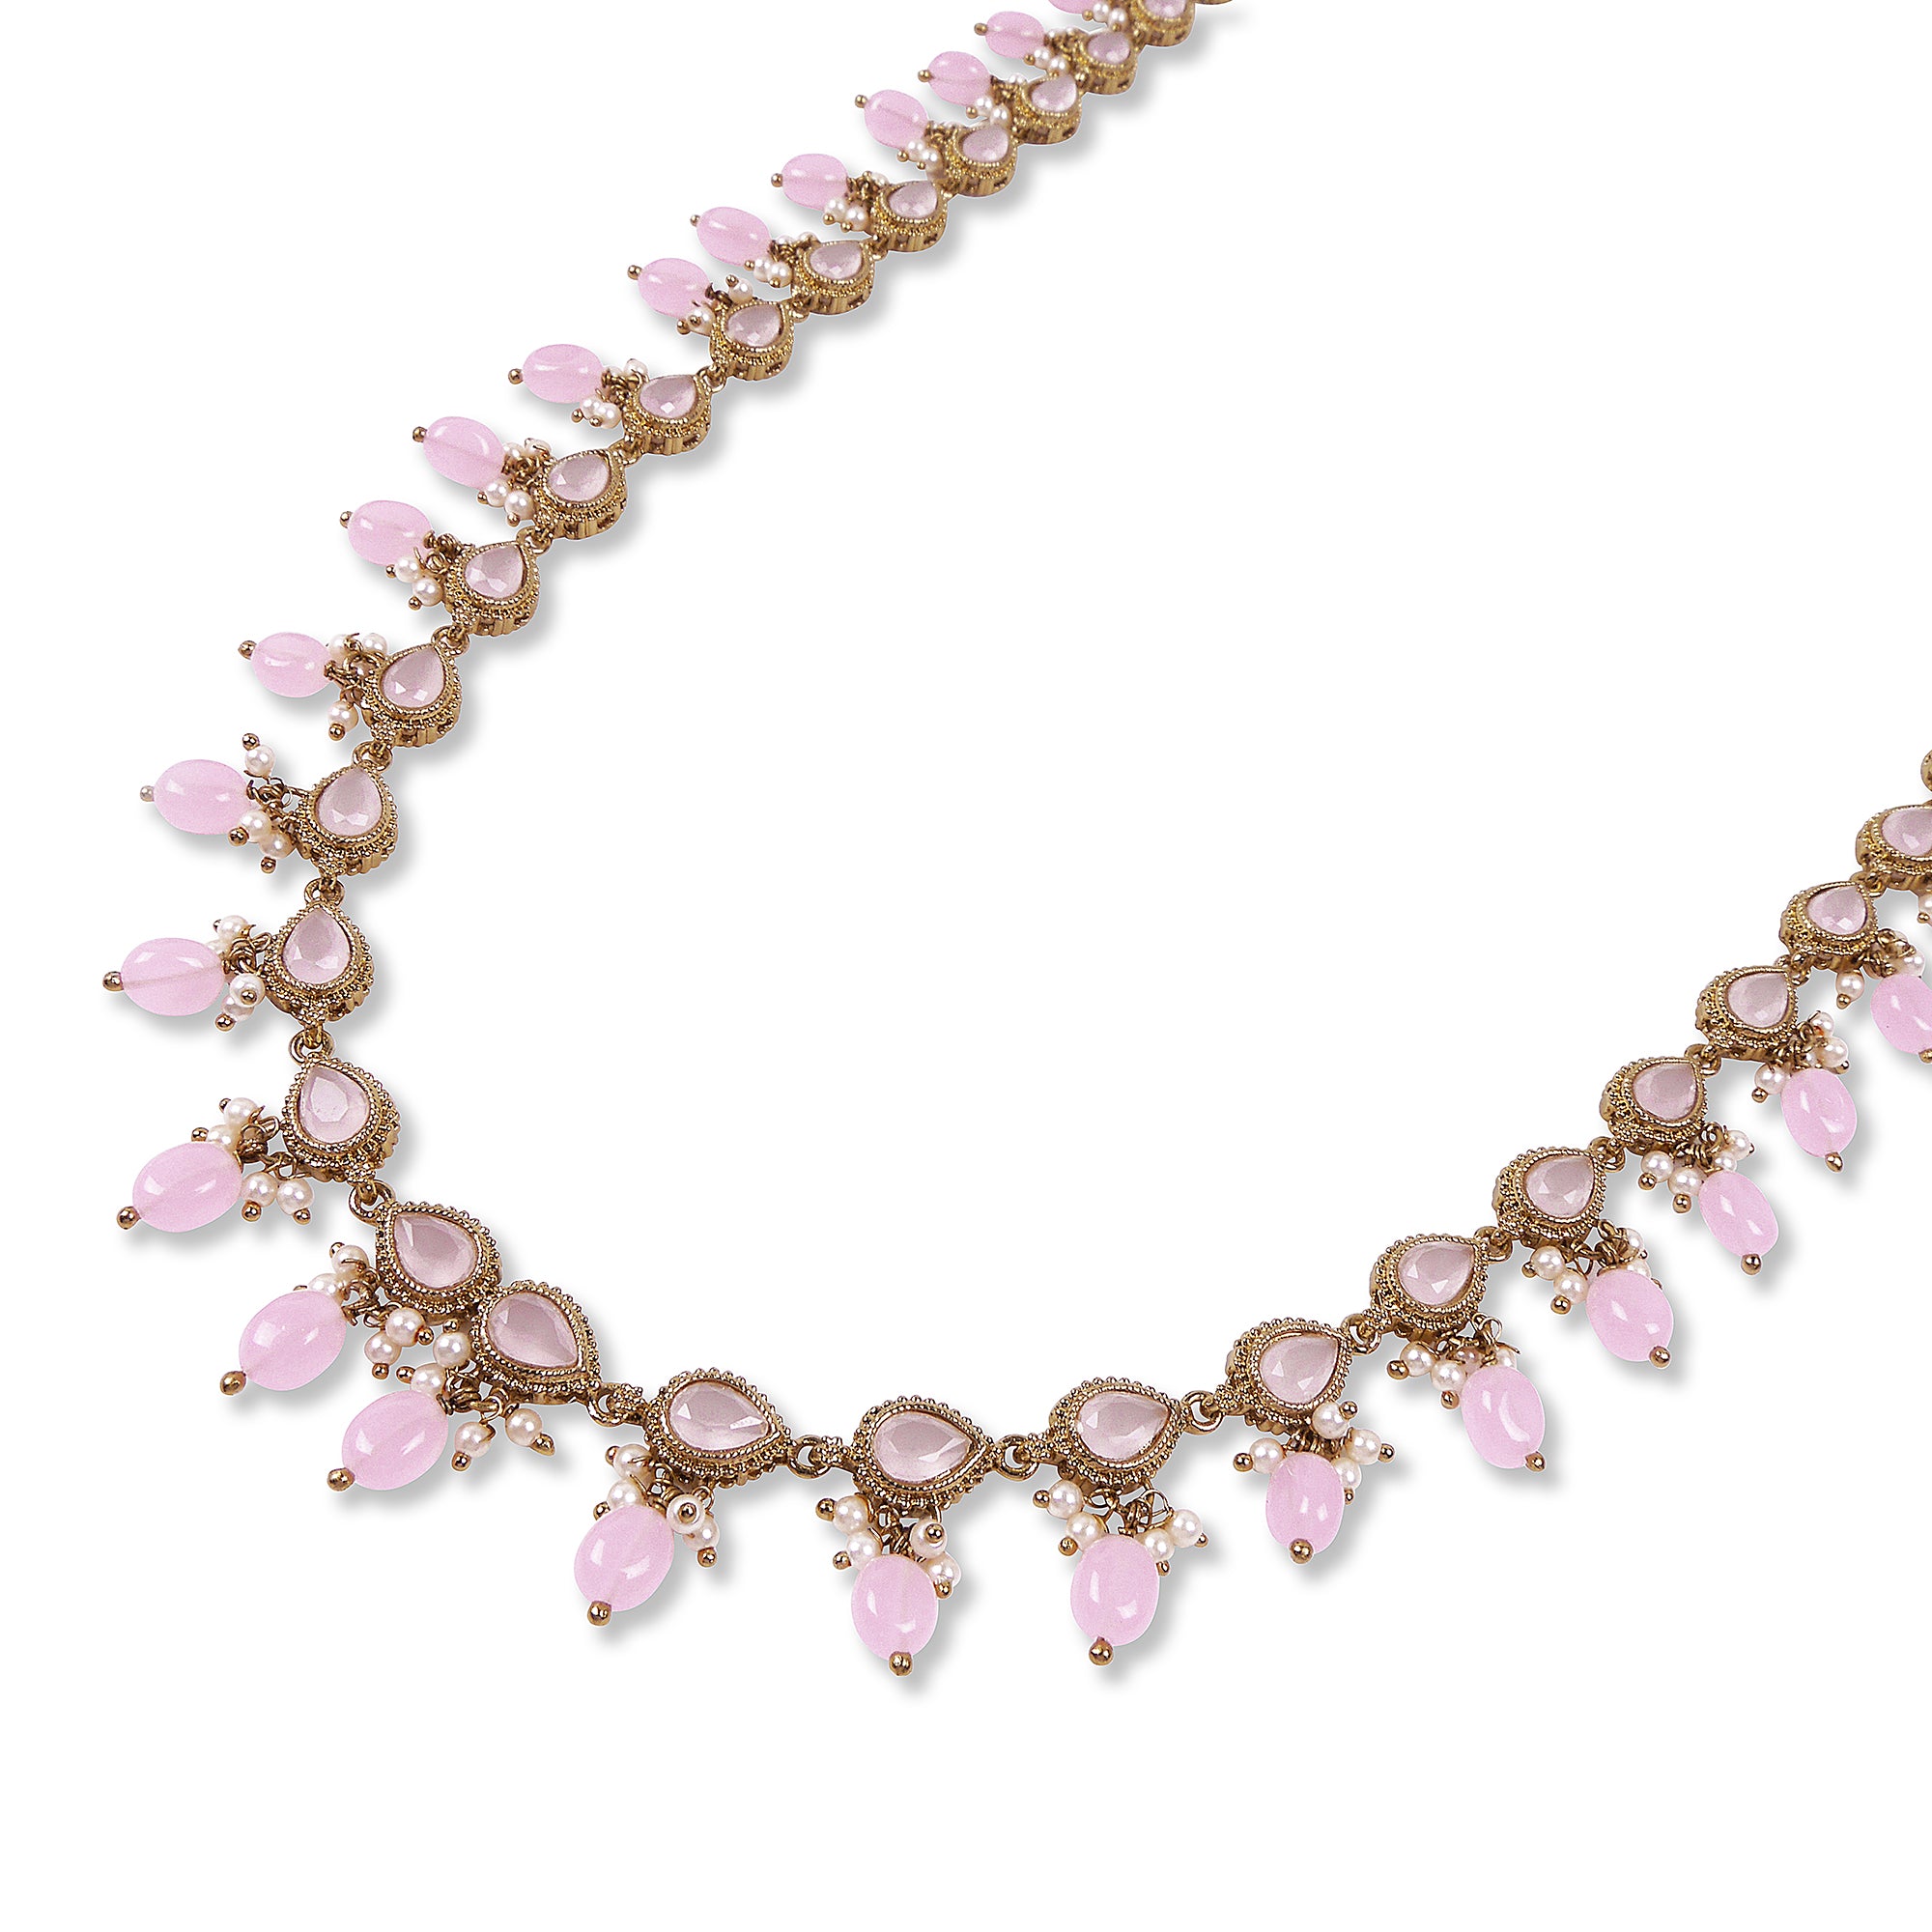 Ariana Long Necklace in Light Pink